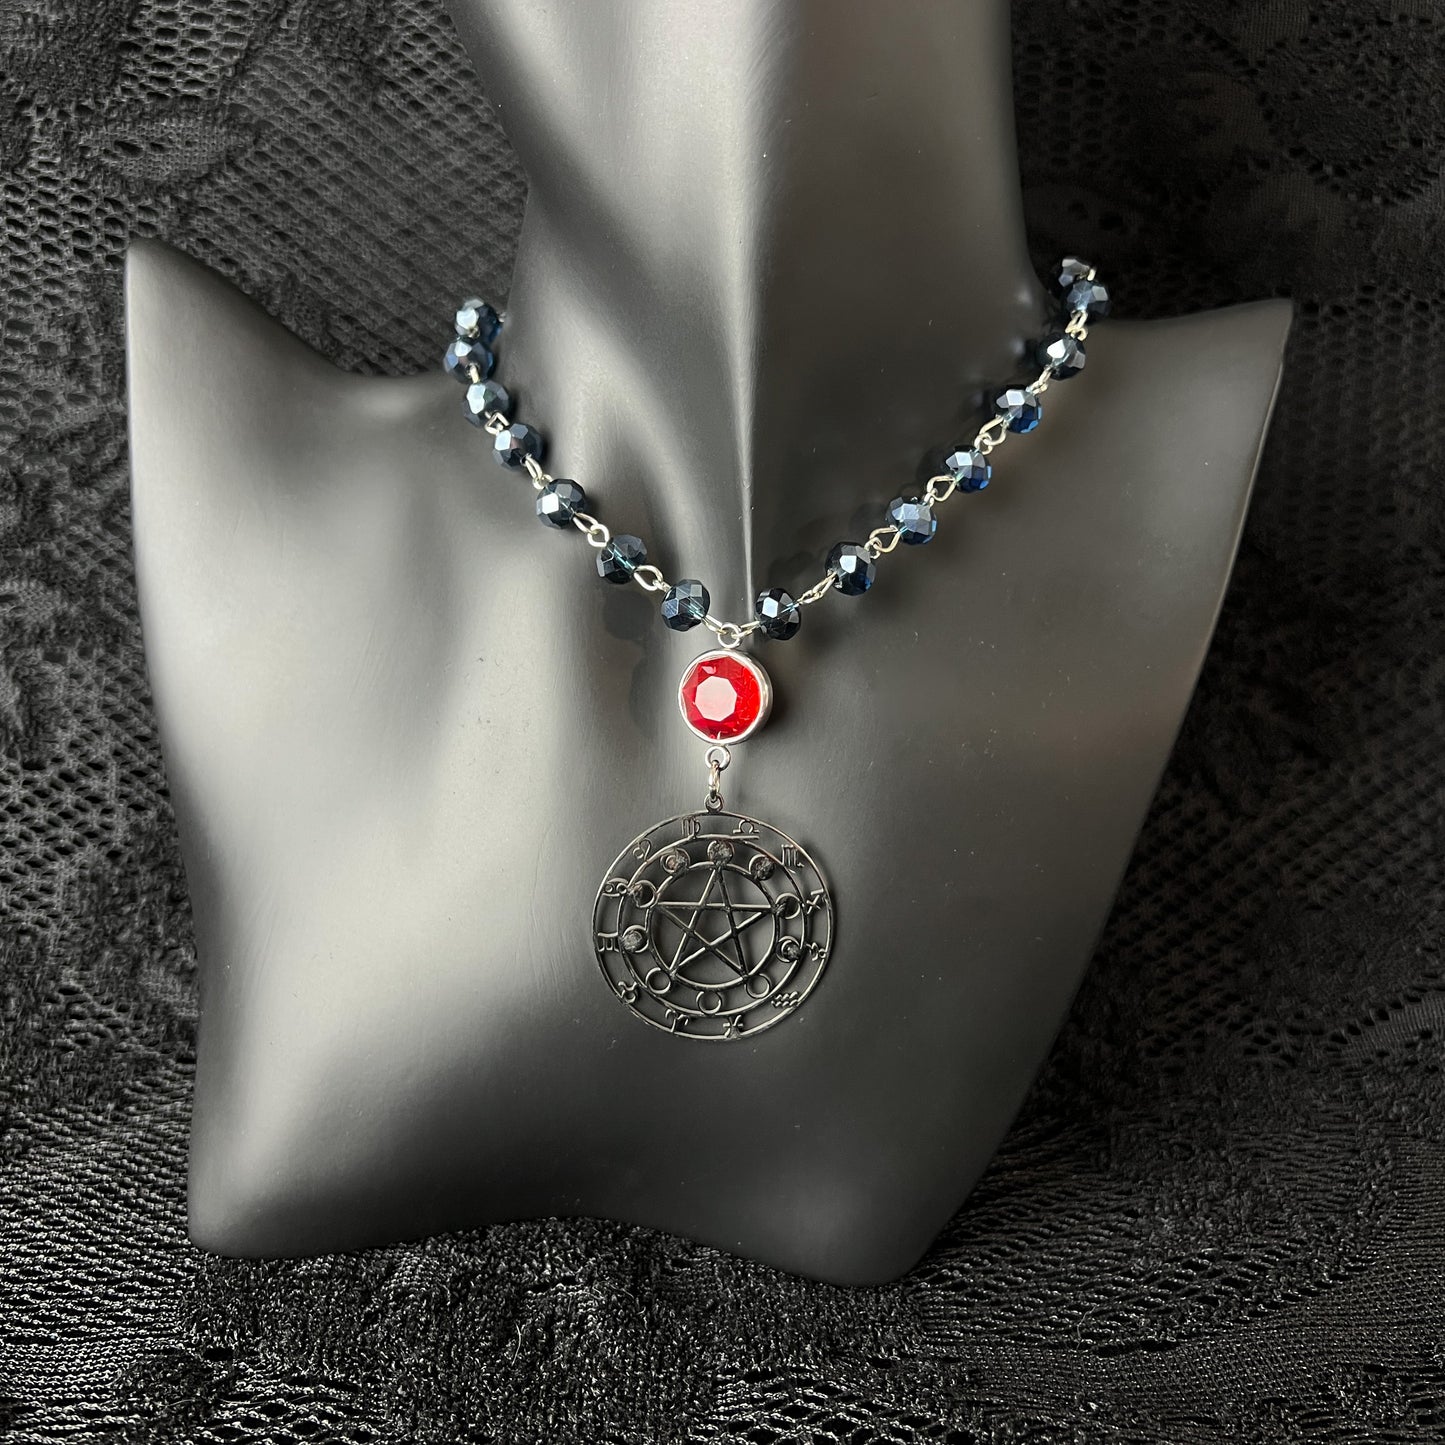 Pentacle, Moon phases and Zodiac signs rosary style choker Baguette Magick